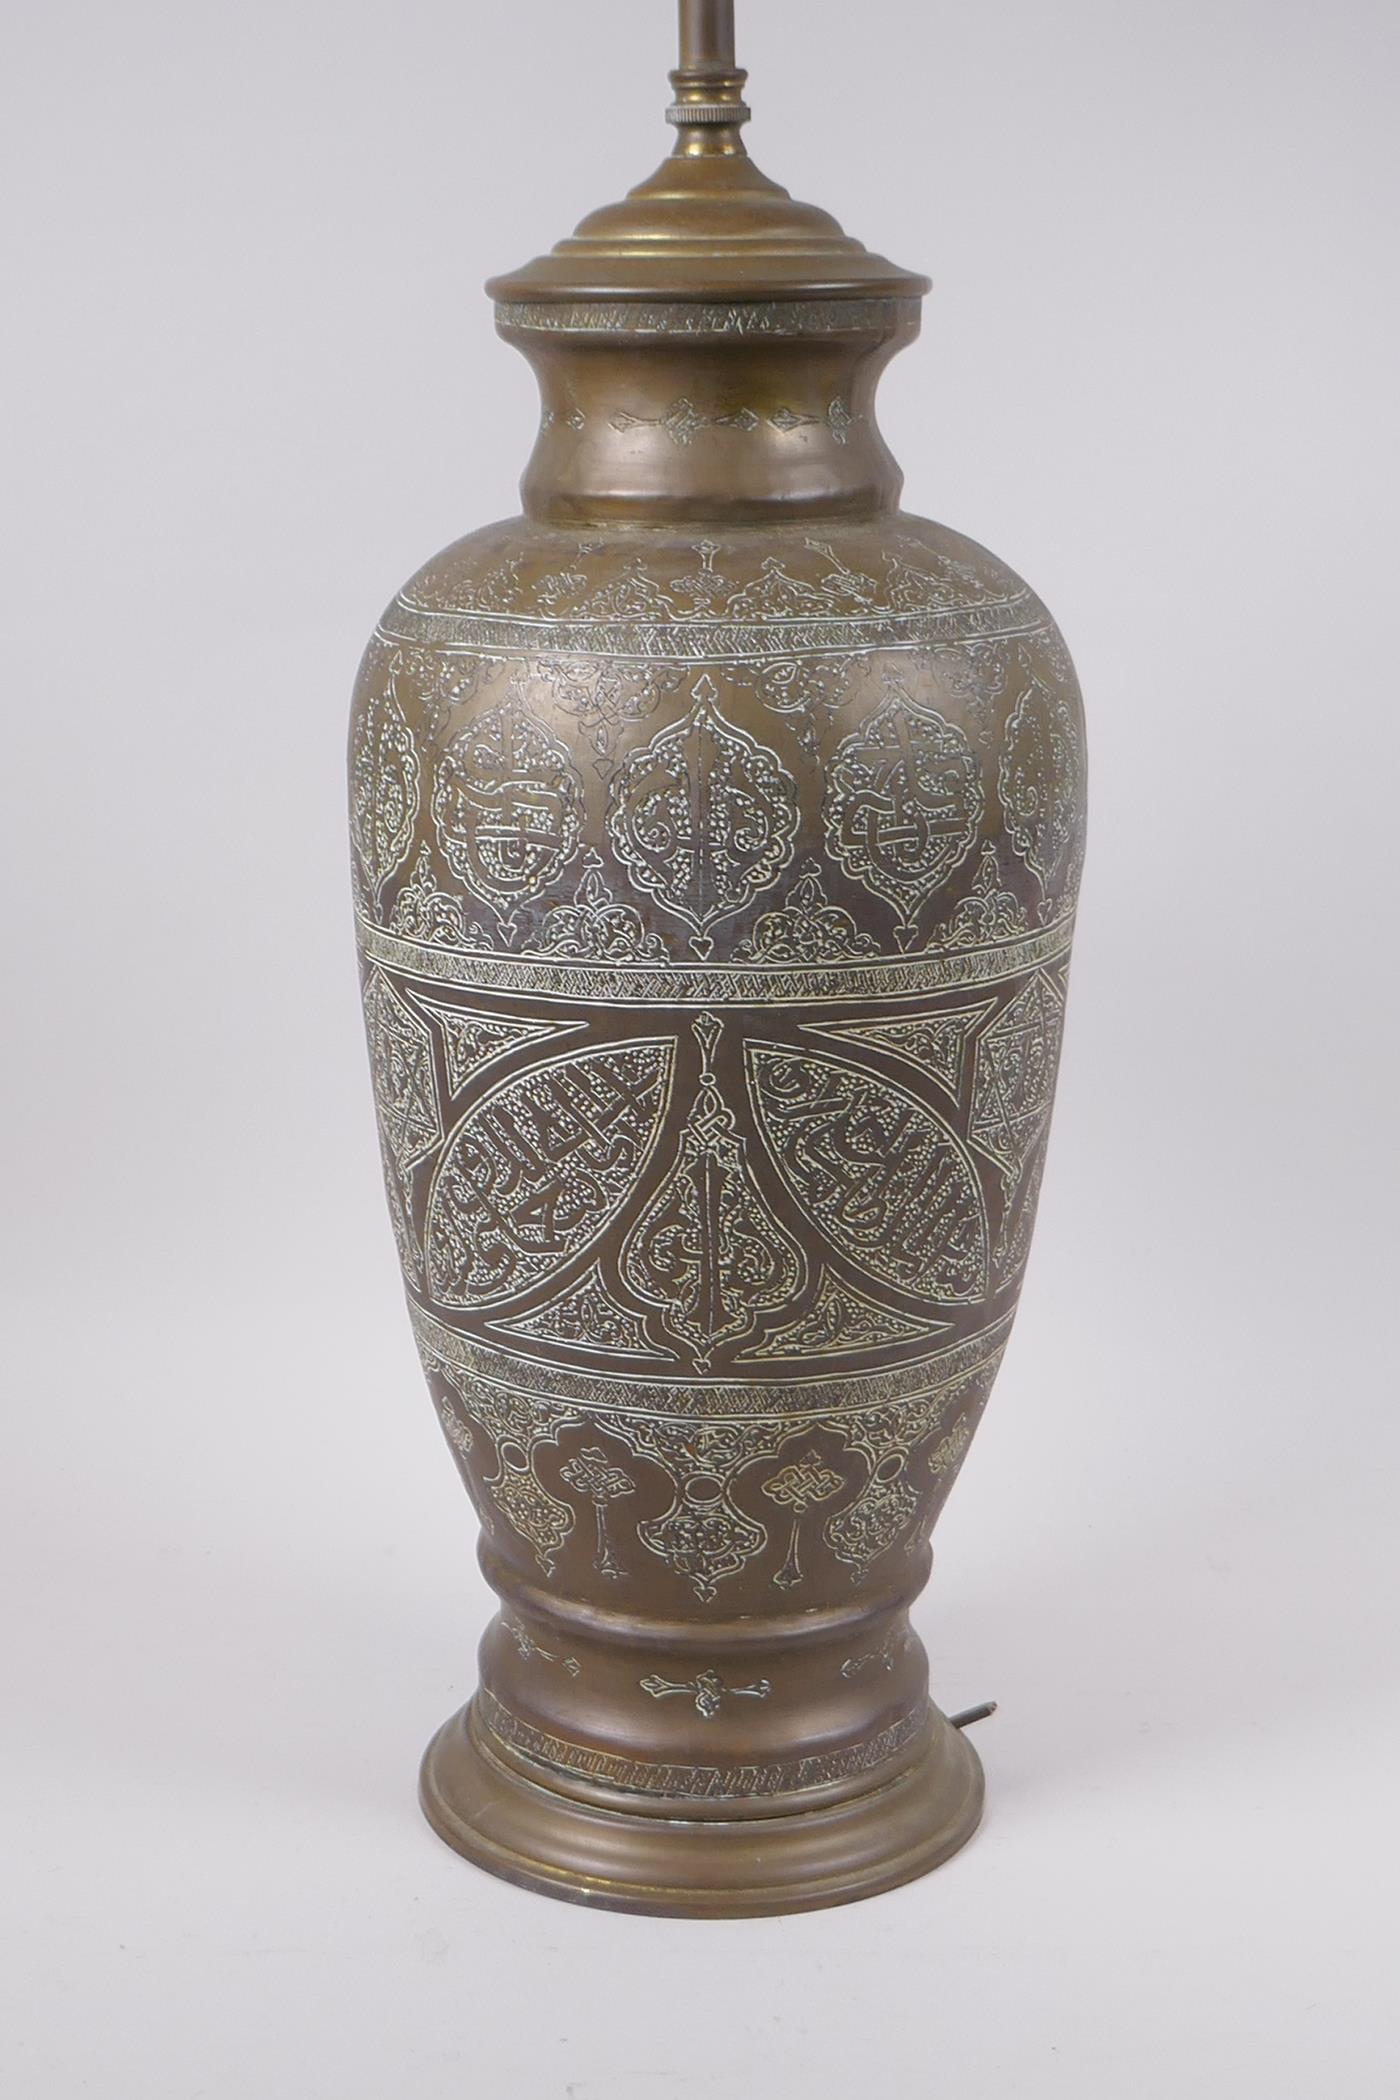 An Islamic brass vase with chased script decoration, converted to a table lamp, 67cm high - Image 2 of 6